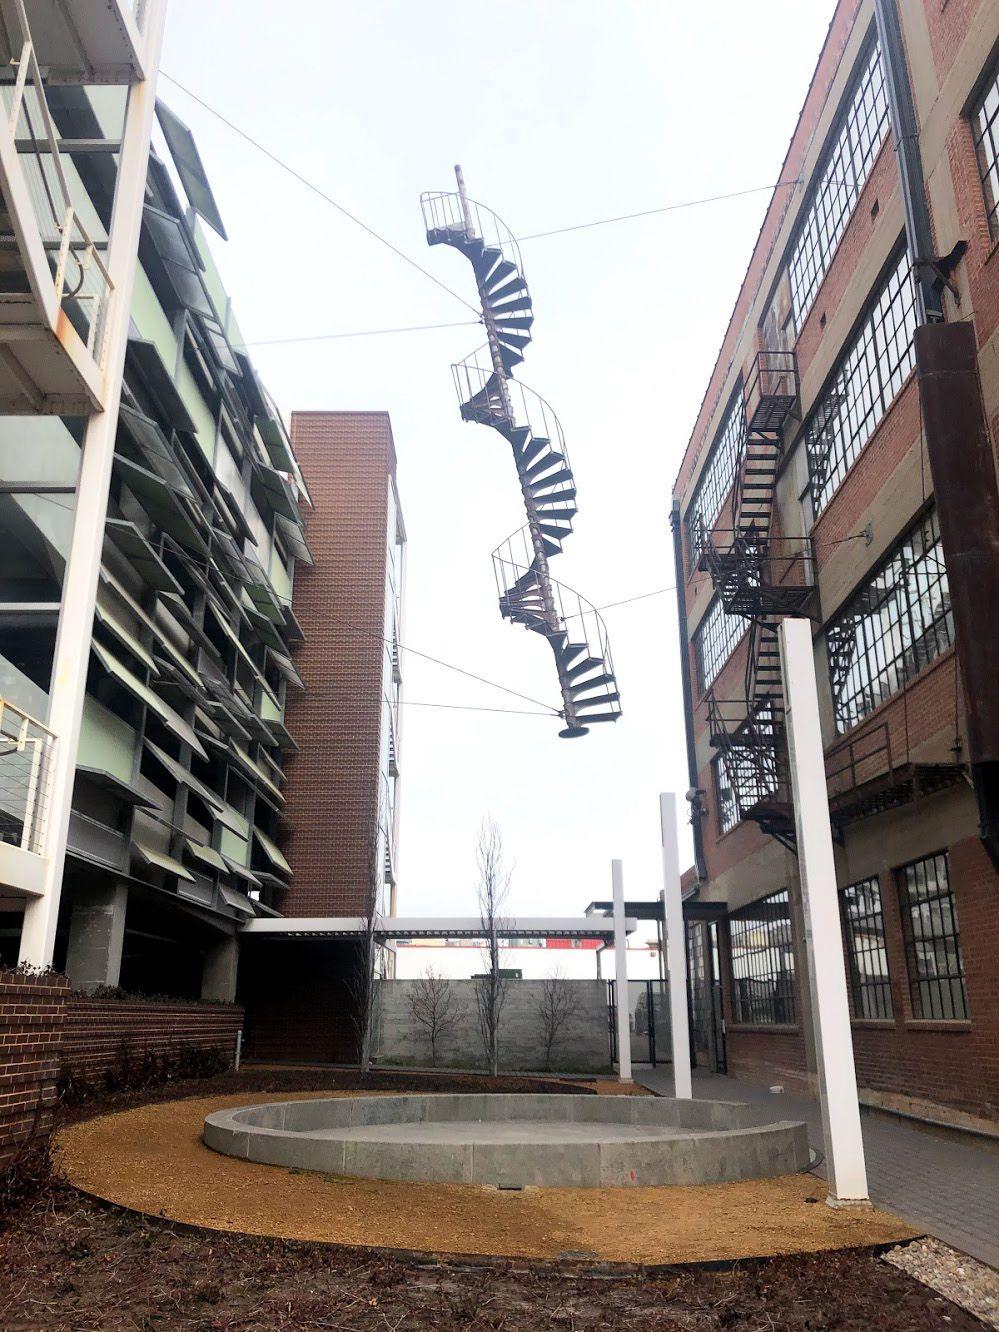 An alley with a hanging spiral staircase that resembled a DNA strand.